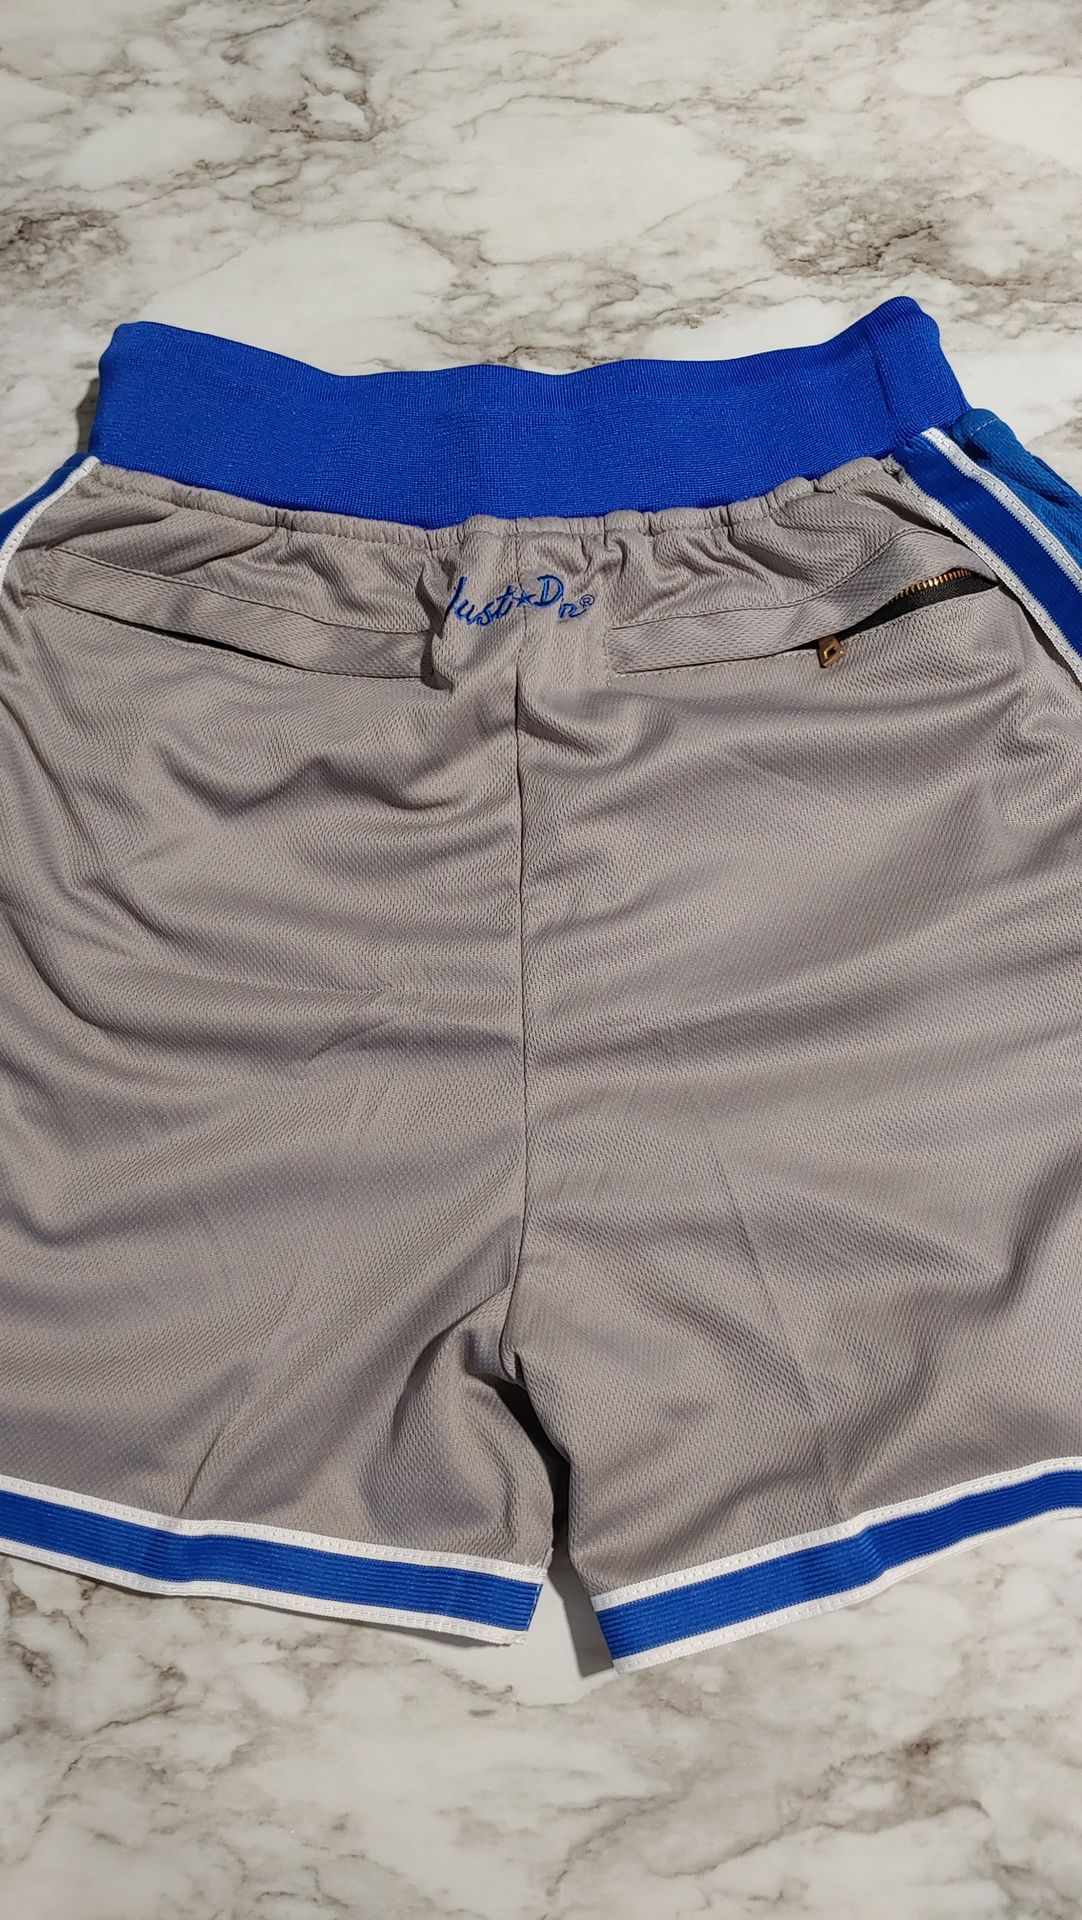 Dodgers Louis Vuitton Shorts for Sale in Lakewood, WA - OfferUp